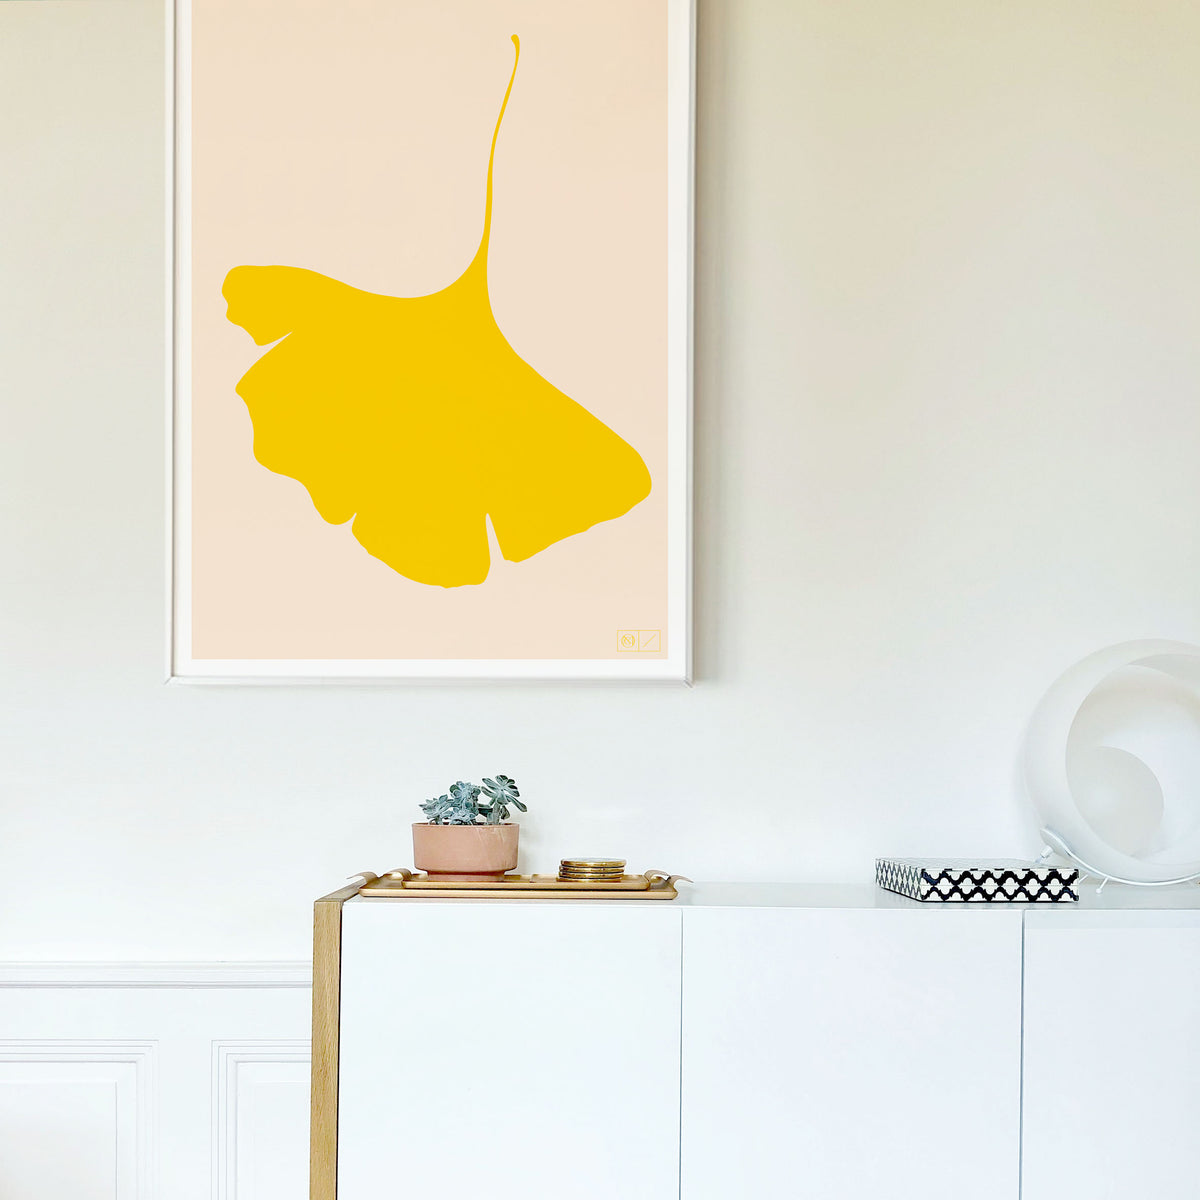 Common Modern, Ginkgo Pop Limited Edition Poster, No. 6 Ginko Pop (yellow/white) Large, Decorative,